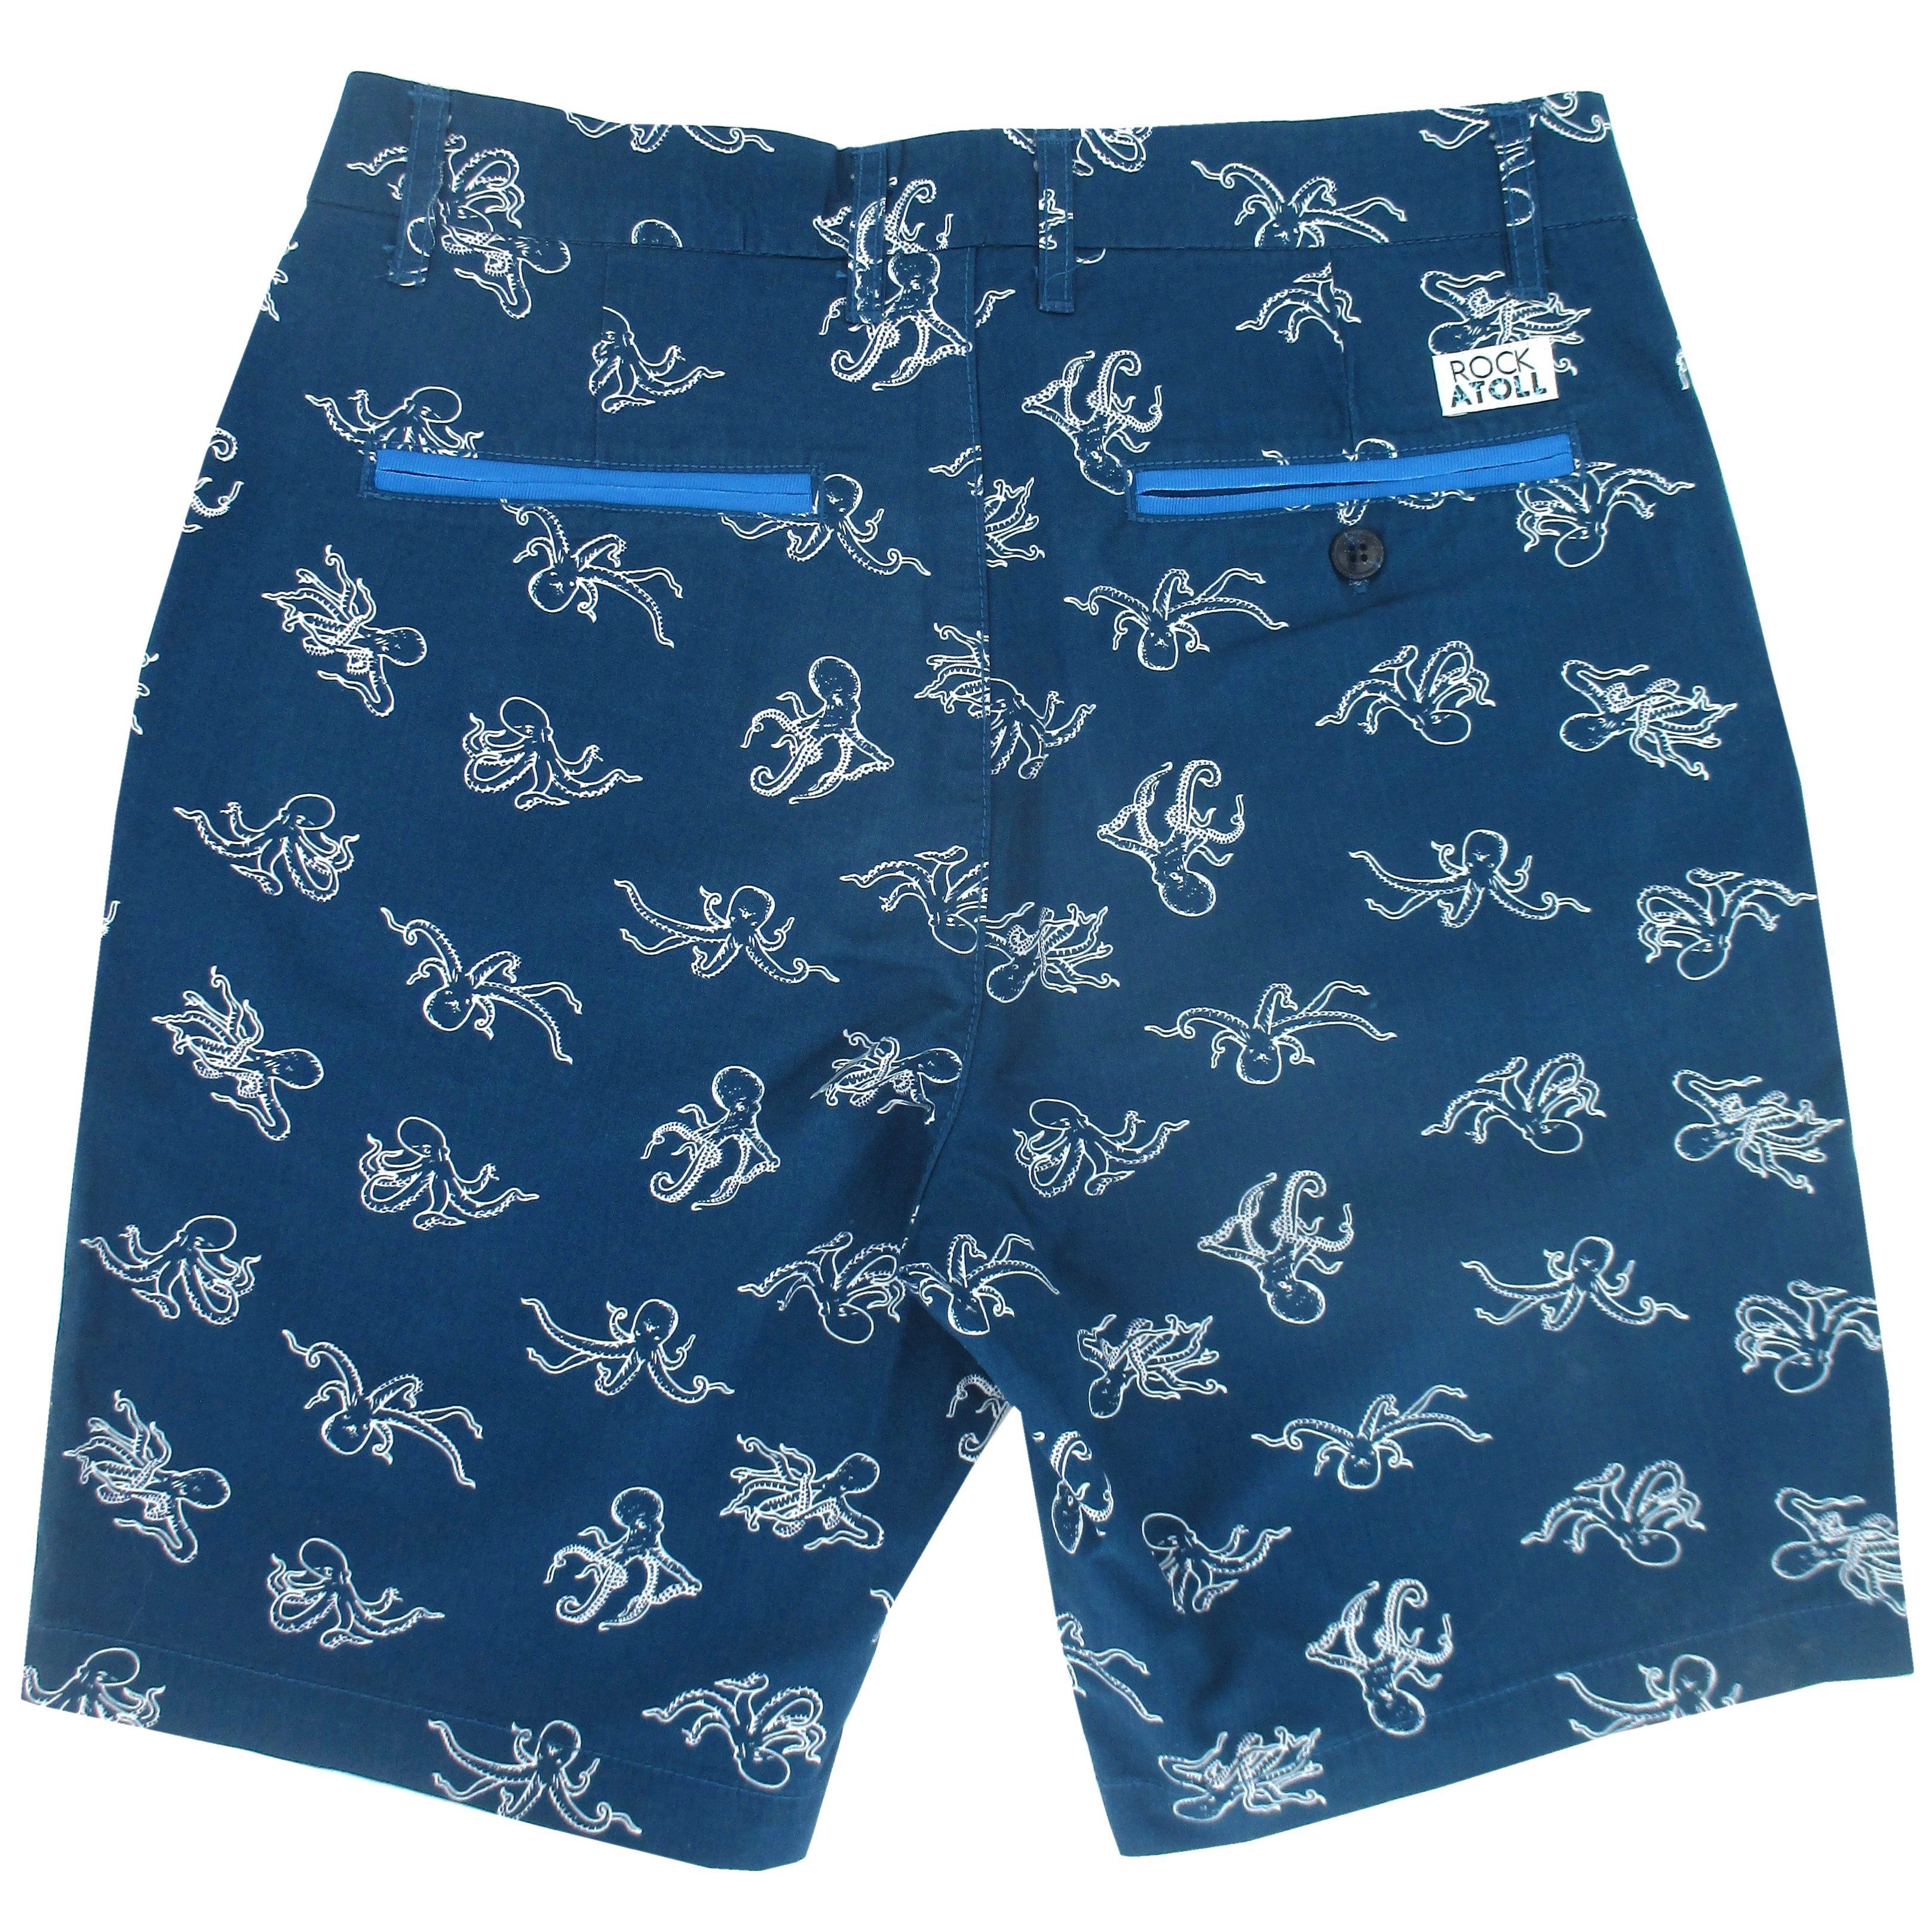 Bright Blue Octopus Patterned Sea Creatures Themed Flat Front Chino Shorts